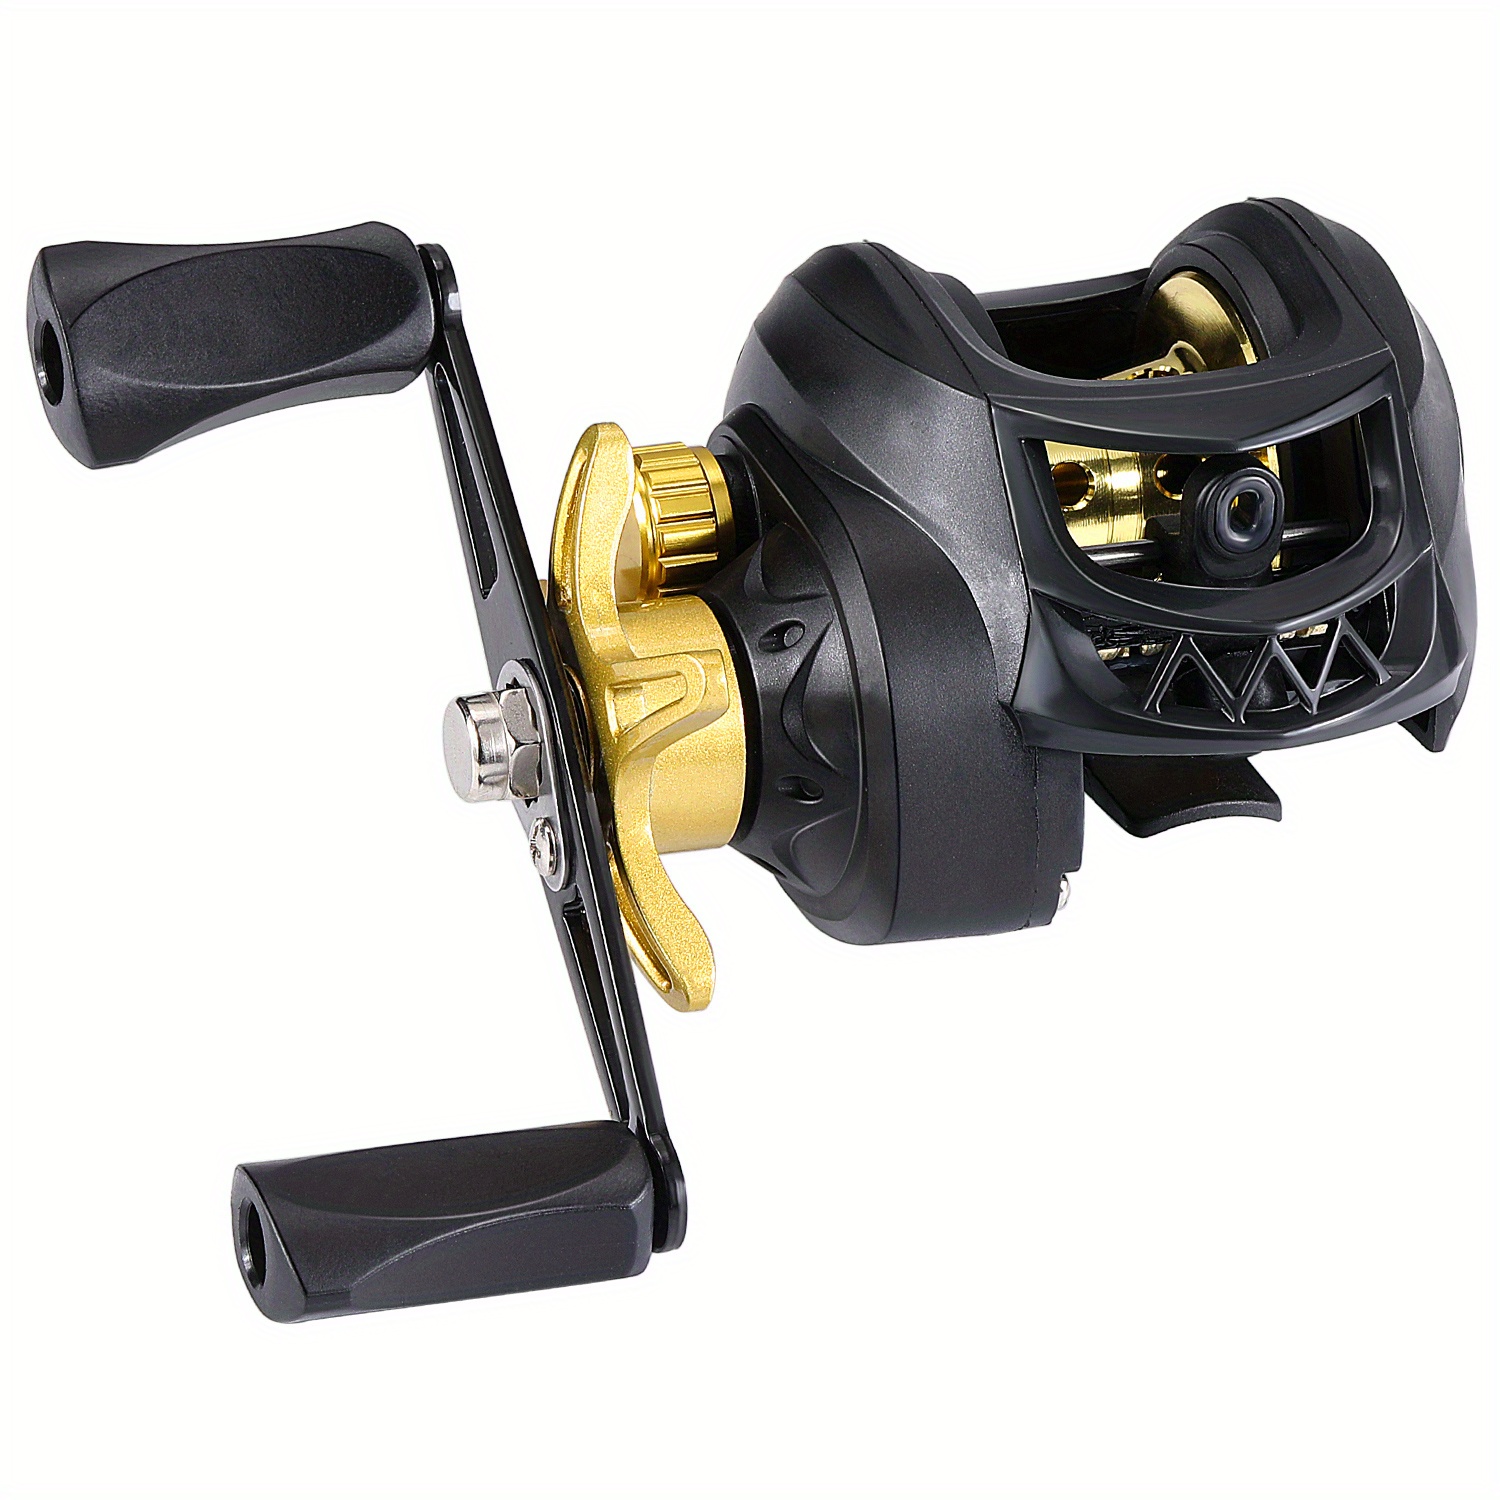 SANWOOD Fishing Reel Exquisite Spinning Metal 7.2:1 Gear Ratio Fishing Bait  Caster for Fishing Lover 